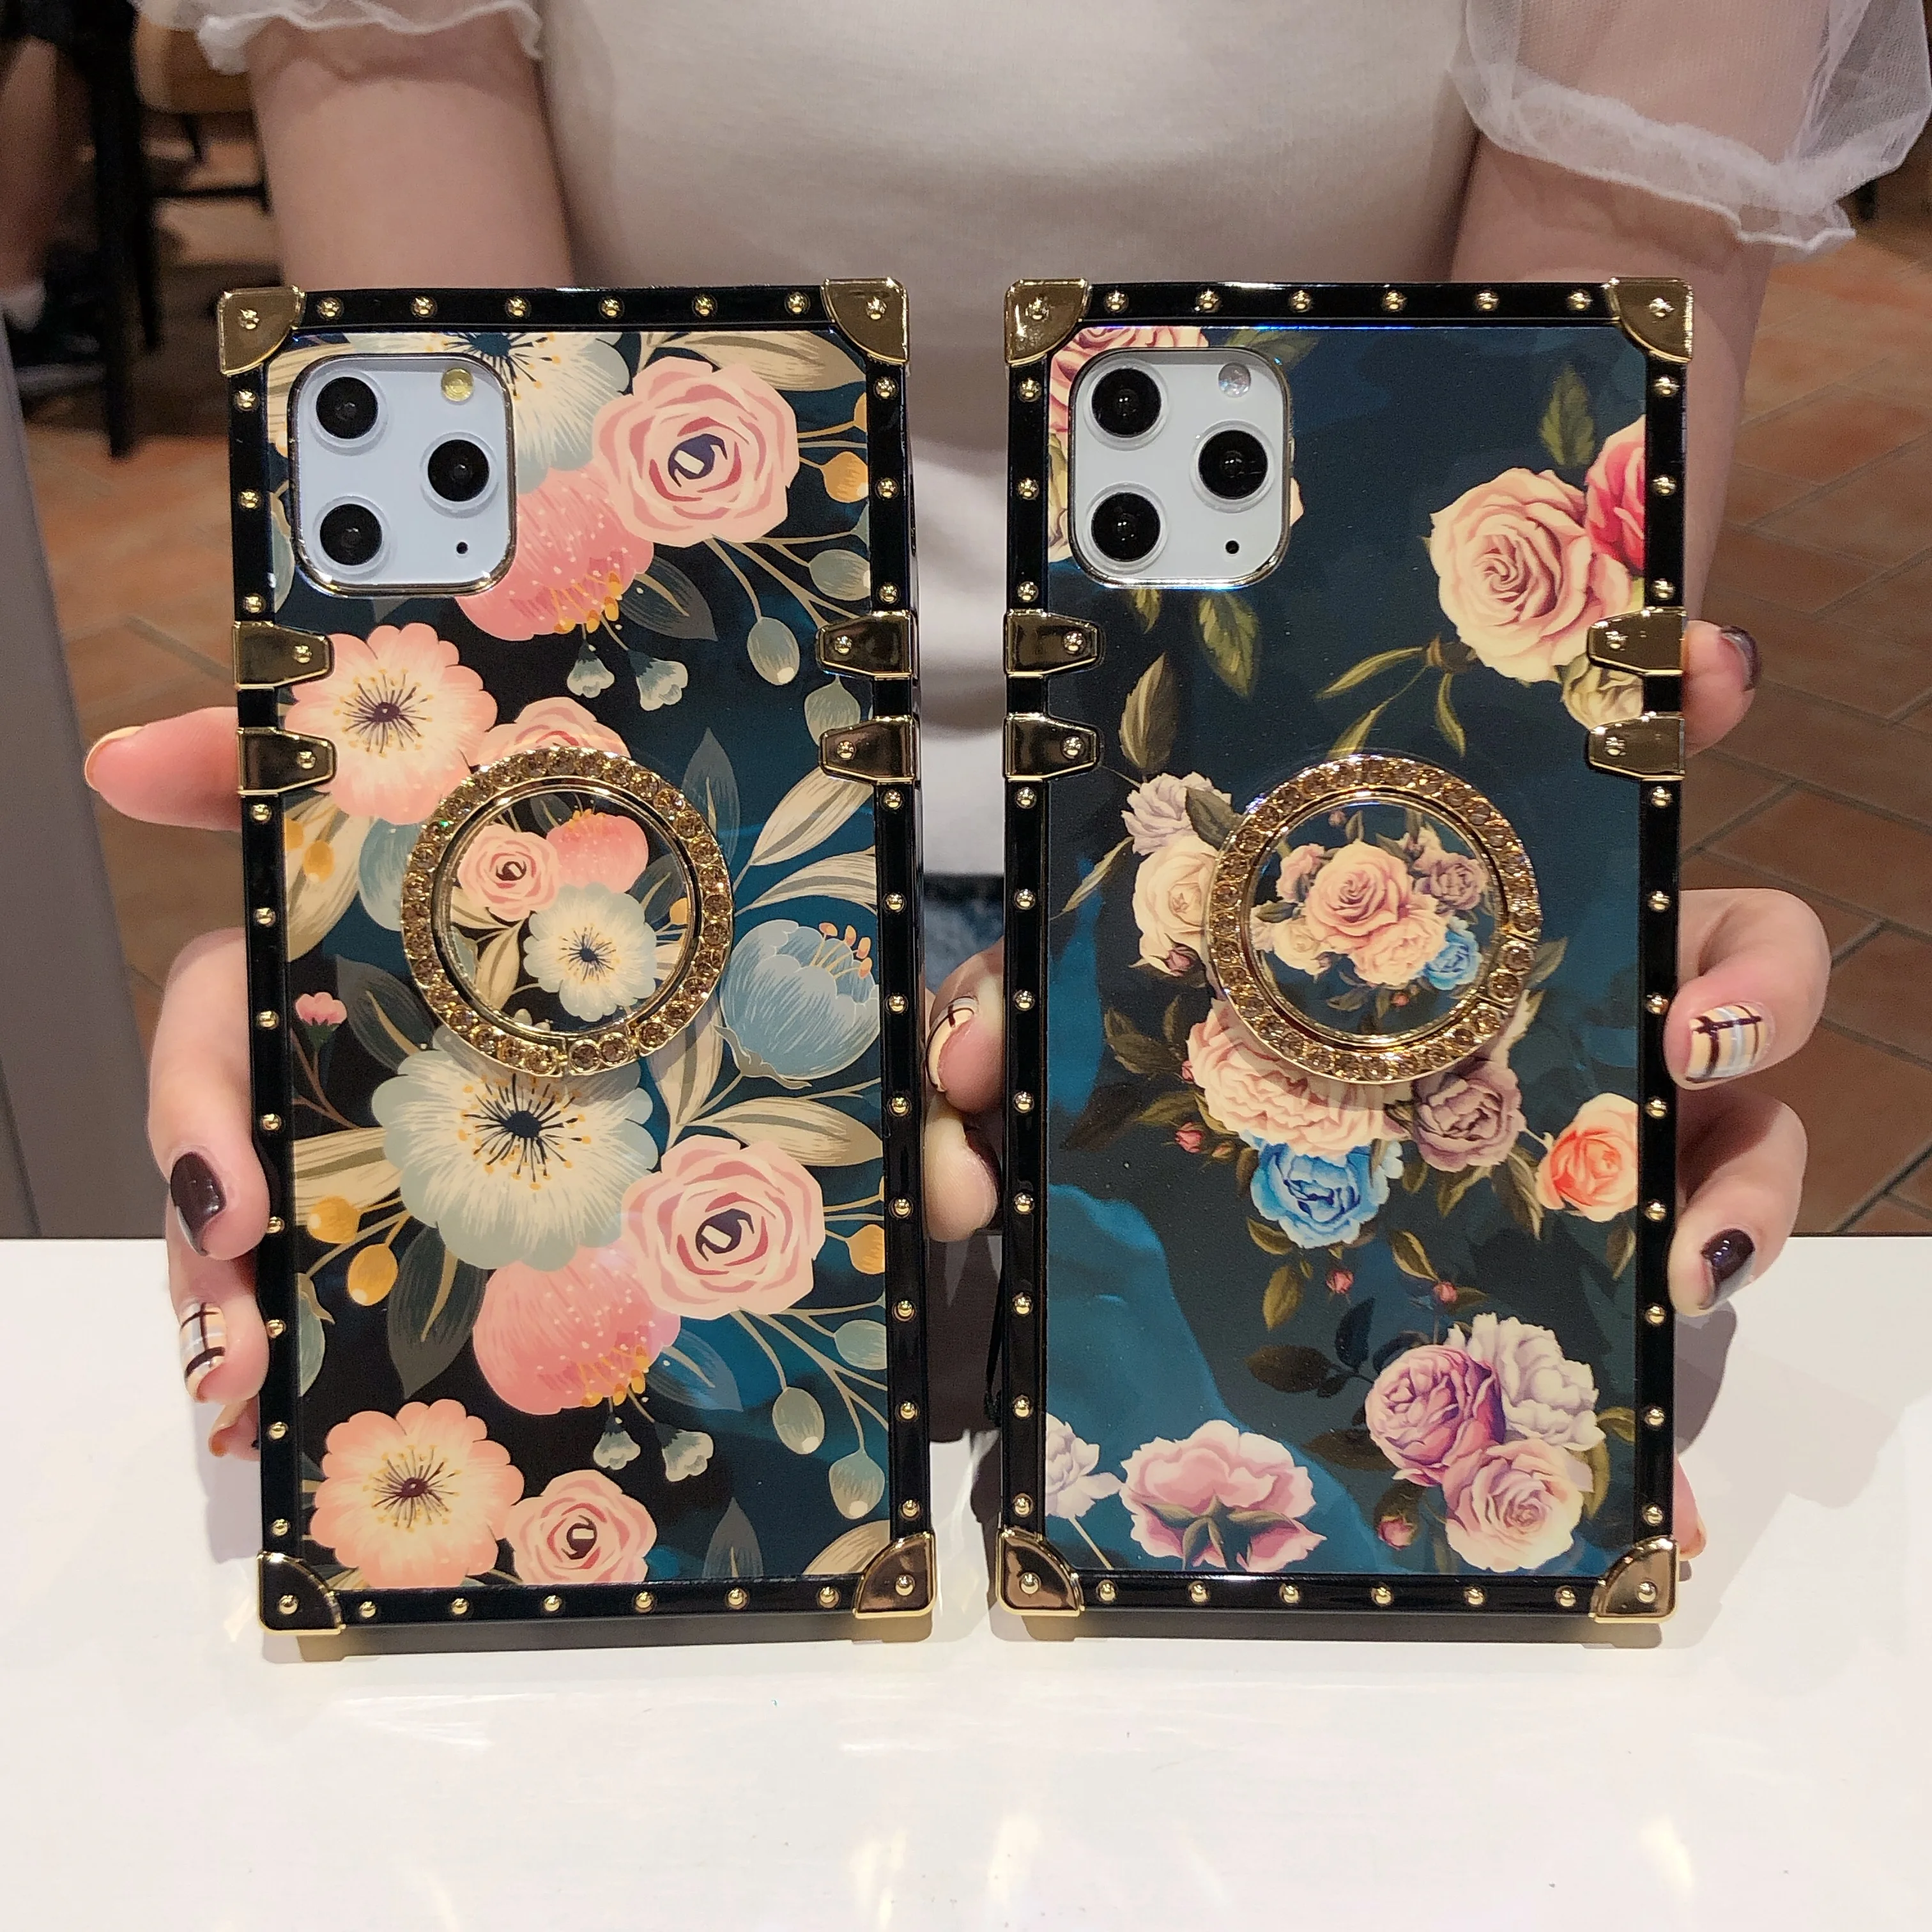 Фото For Samsung Note10 Plus Note9 8 S10 S10e S8 S9 A70 A50 A20 A30 M30 M20 Case Square Diamond Stand Blue Ray Rose Flower Cover | Мобильные